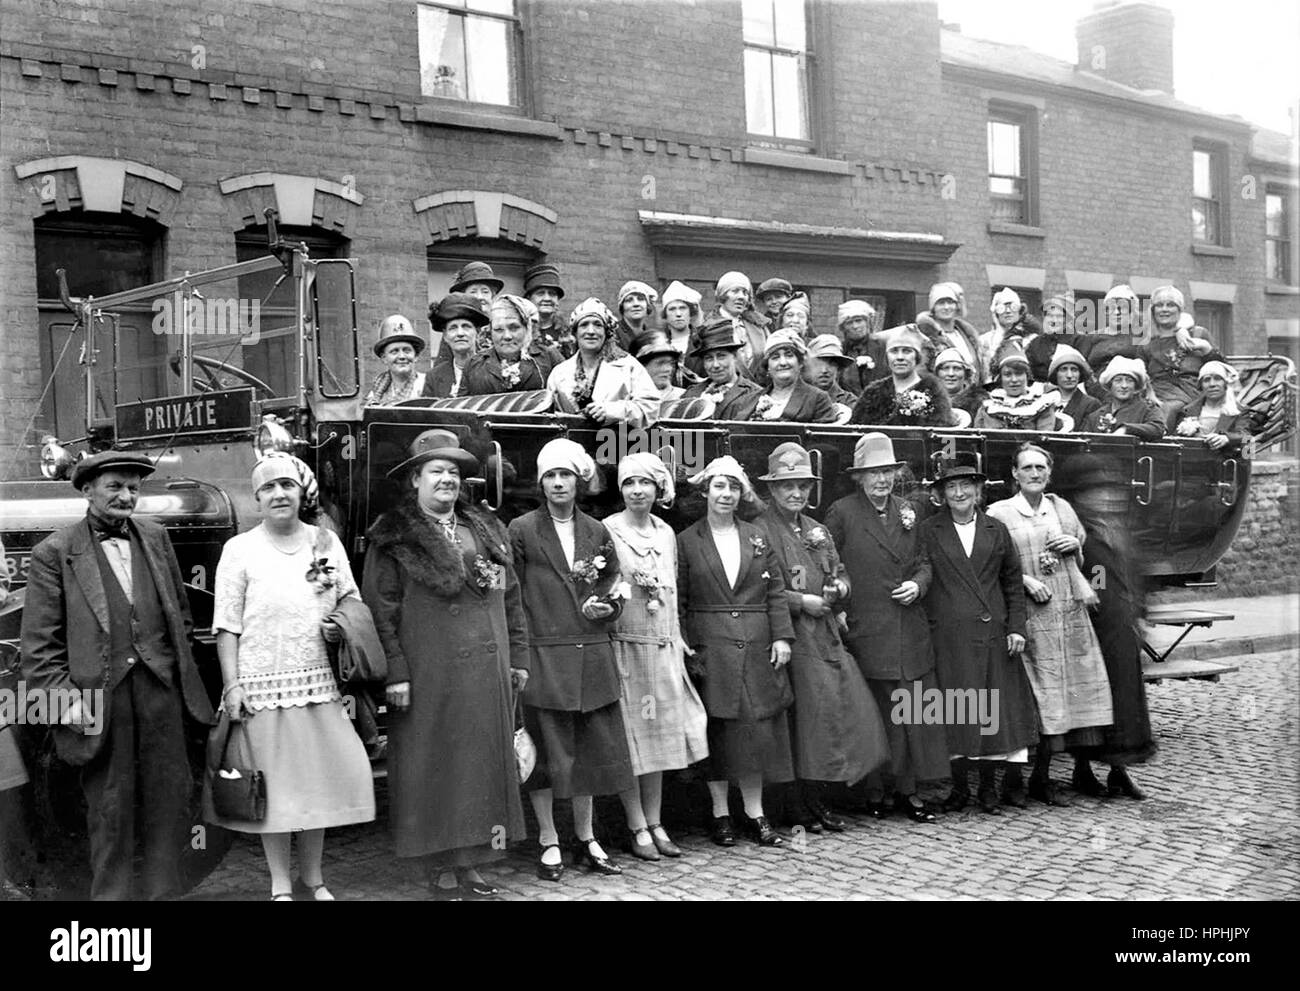 Female workers from the Adams & Company lace making factory in Stoney Street, Nottingham, aboard a charabanc for their annual day out in 1927. Stock Photo